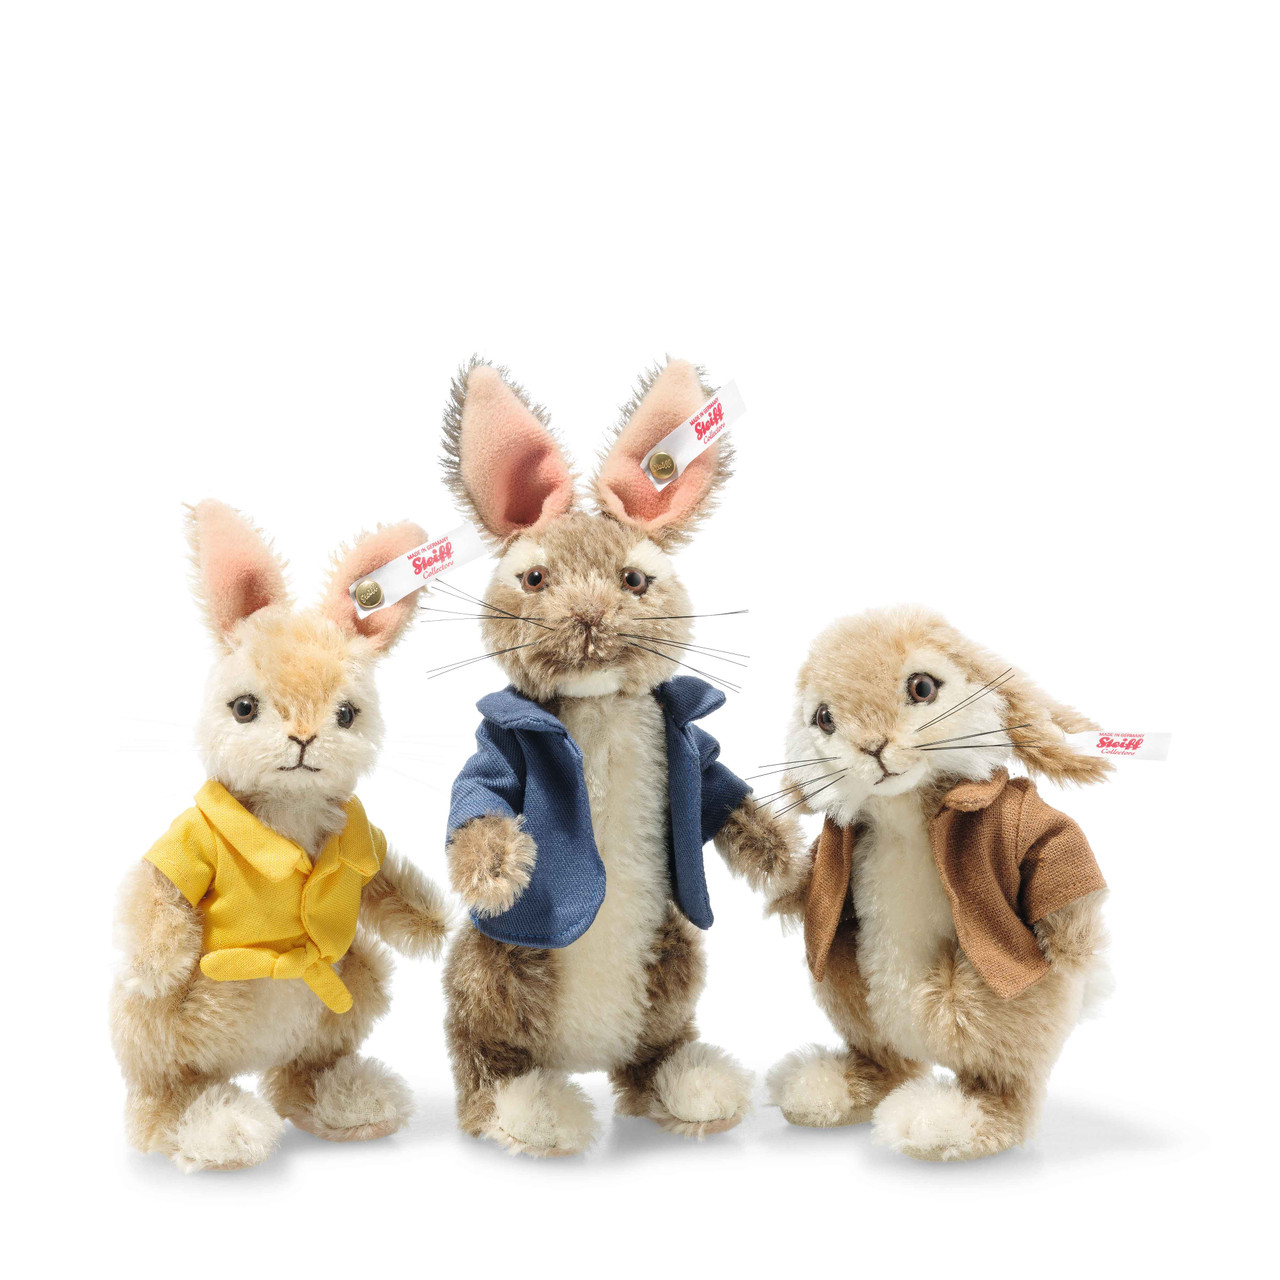 cottontail peter rabbit toy